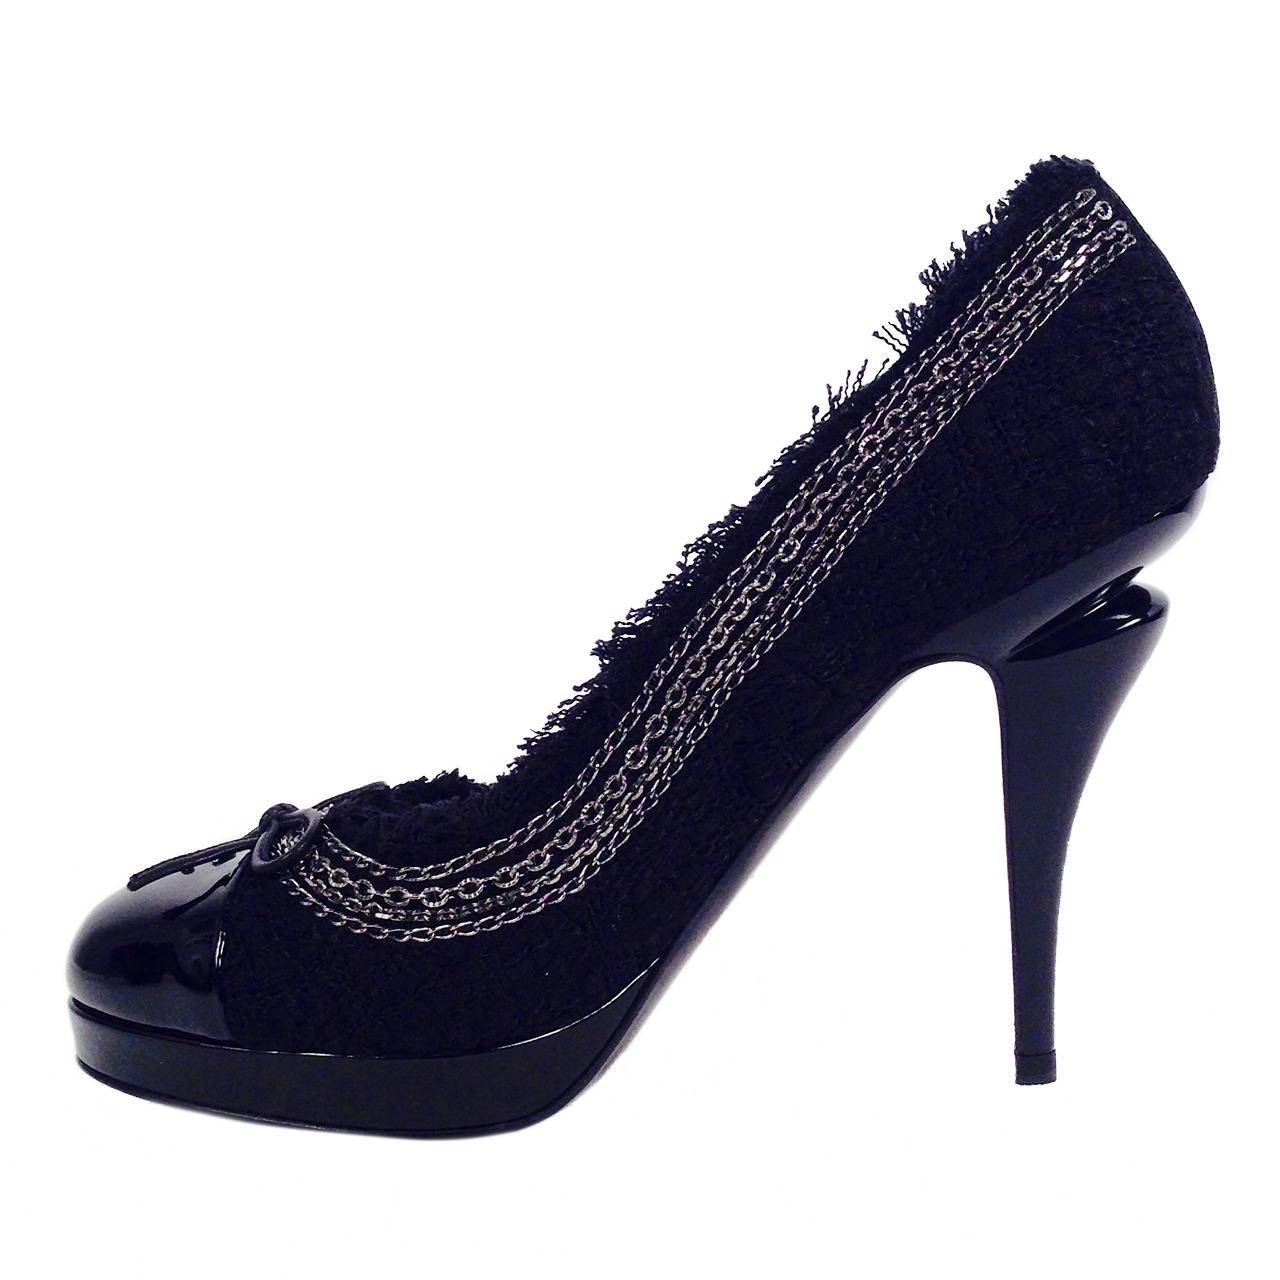 Brand New Chanel Tweed and Patent Leather Platform Pumps With Chain Detail For Sale